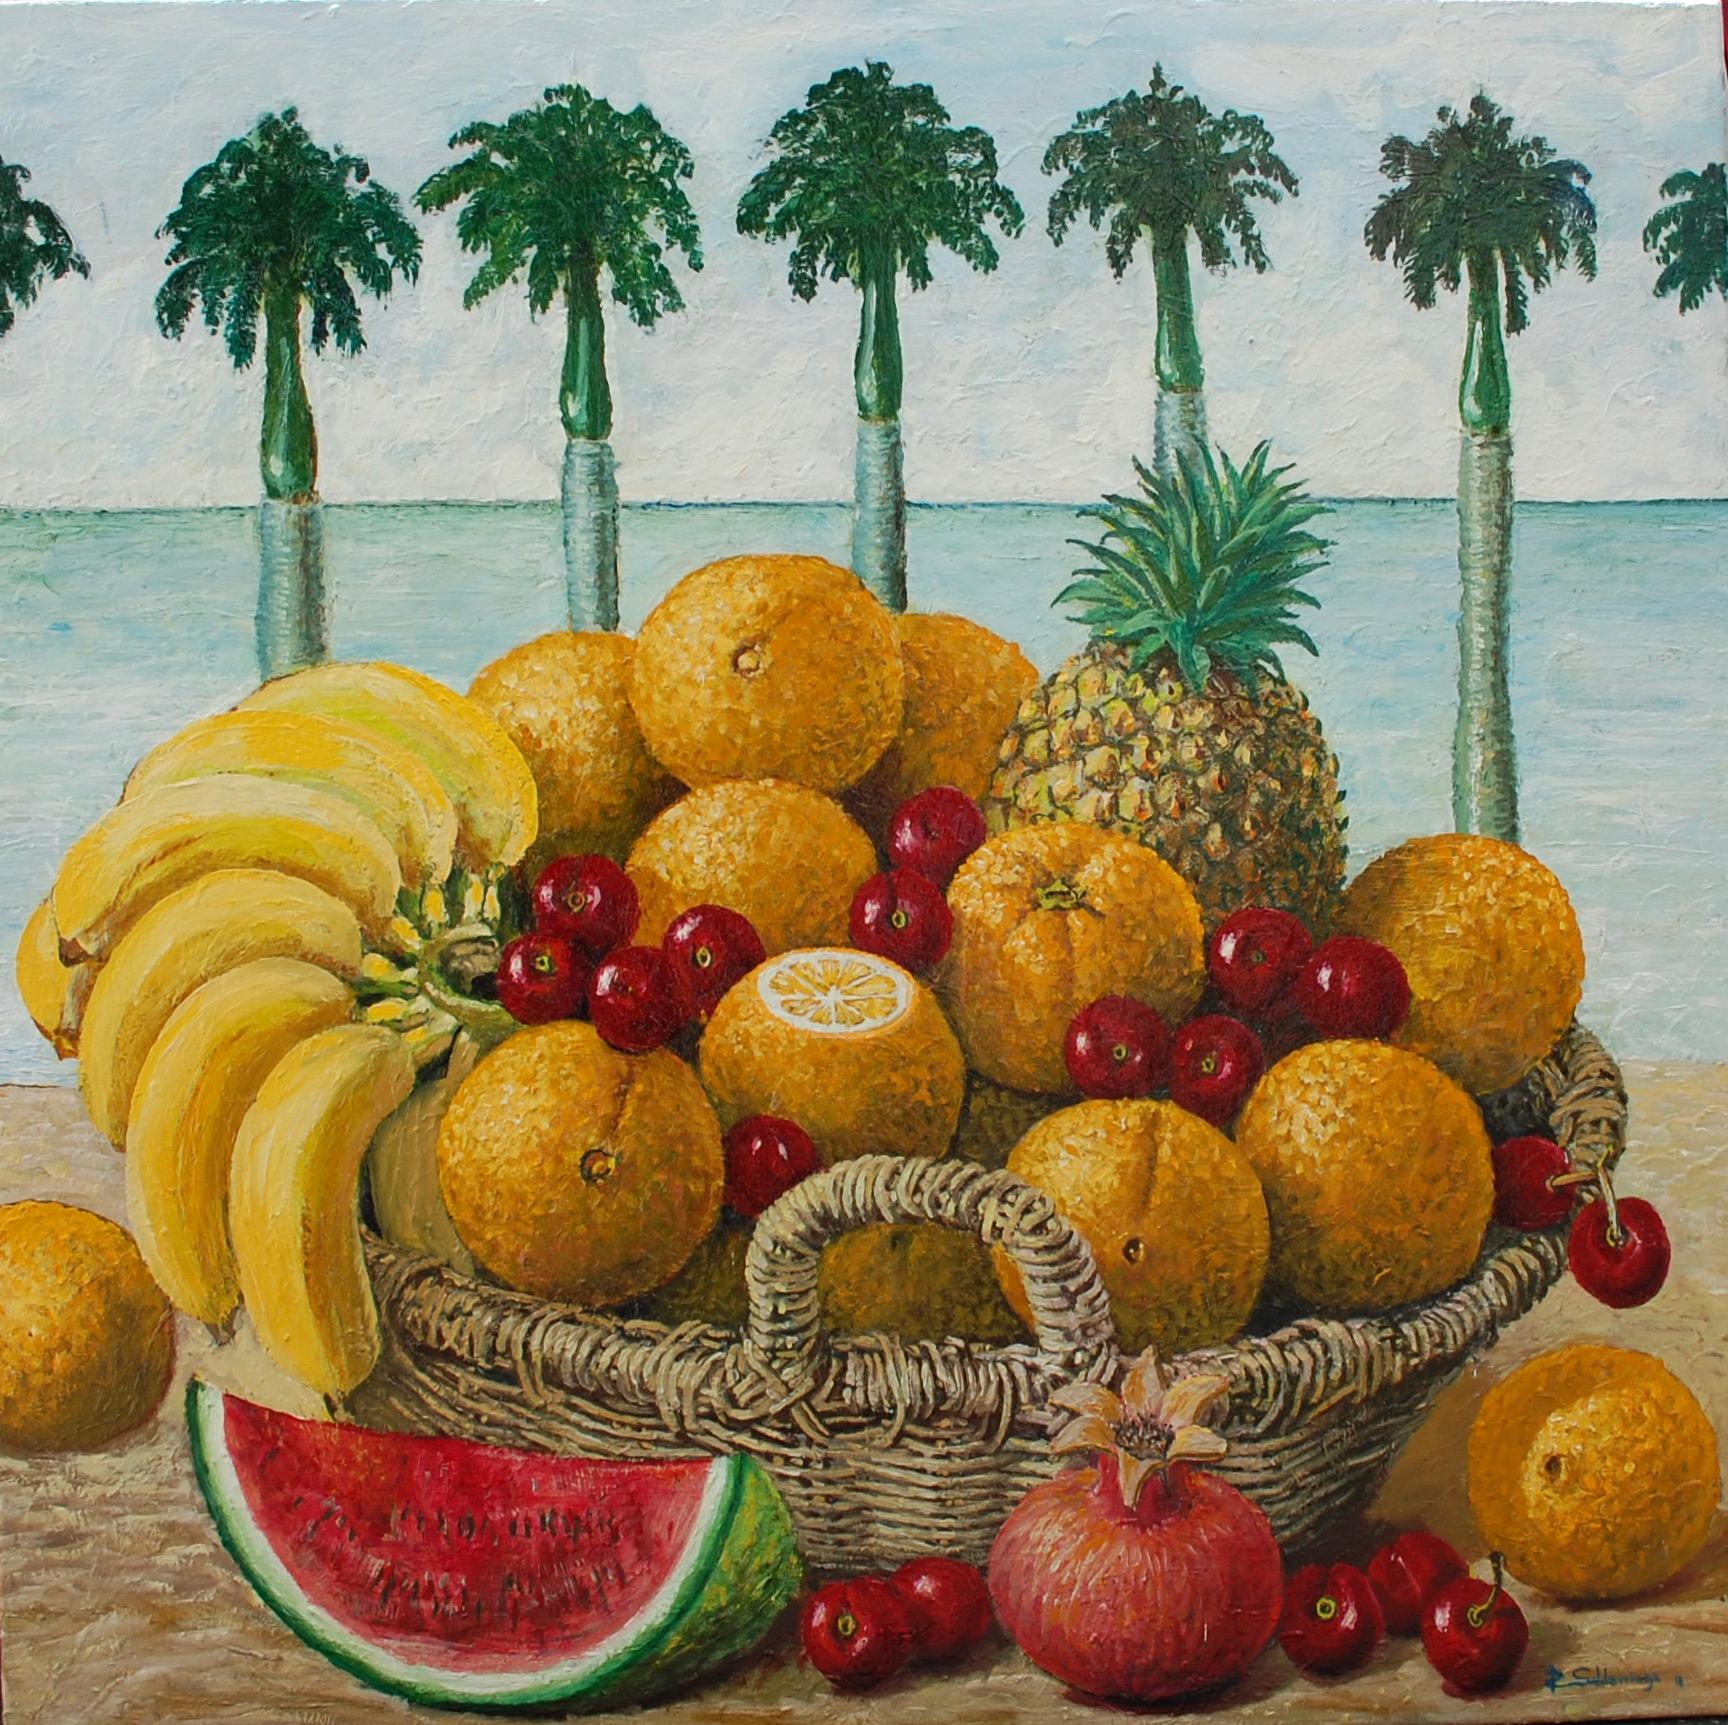 Large Tropical Fruits In the Basket.
RAFAEL SALDARRIAGA was born in Medellin, Colombia in 1955. Arrived in the United States in 1993. After living in New Mexico and Hawaii established his residency in New York City.
He studied in Live de Zulateqi's